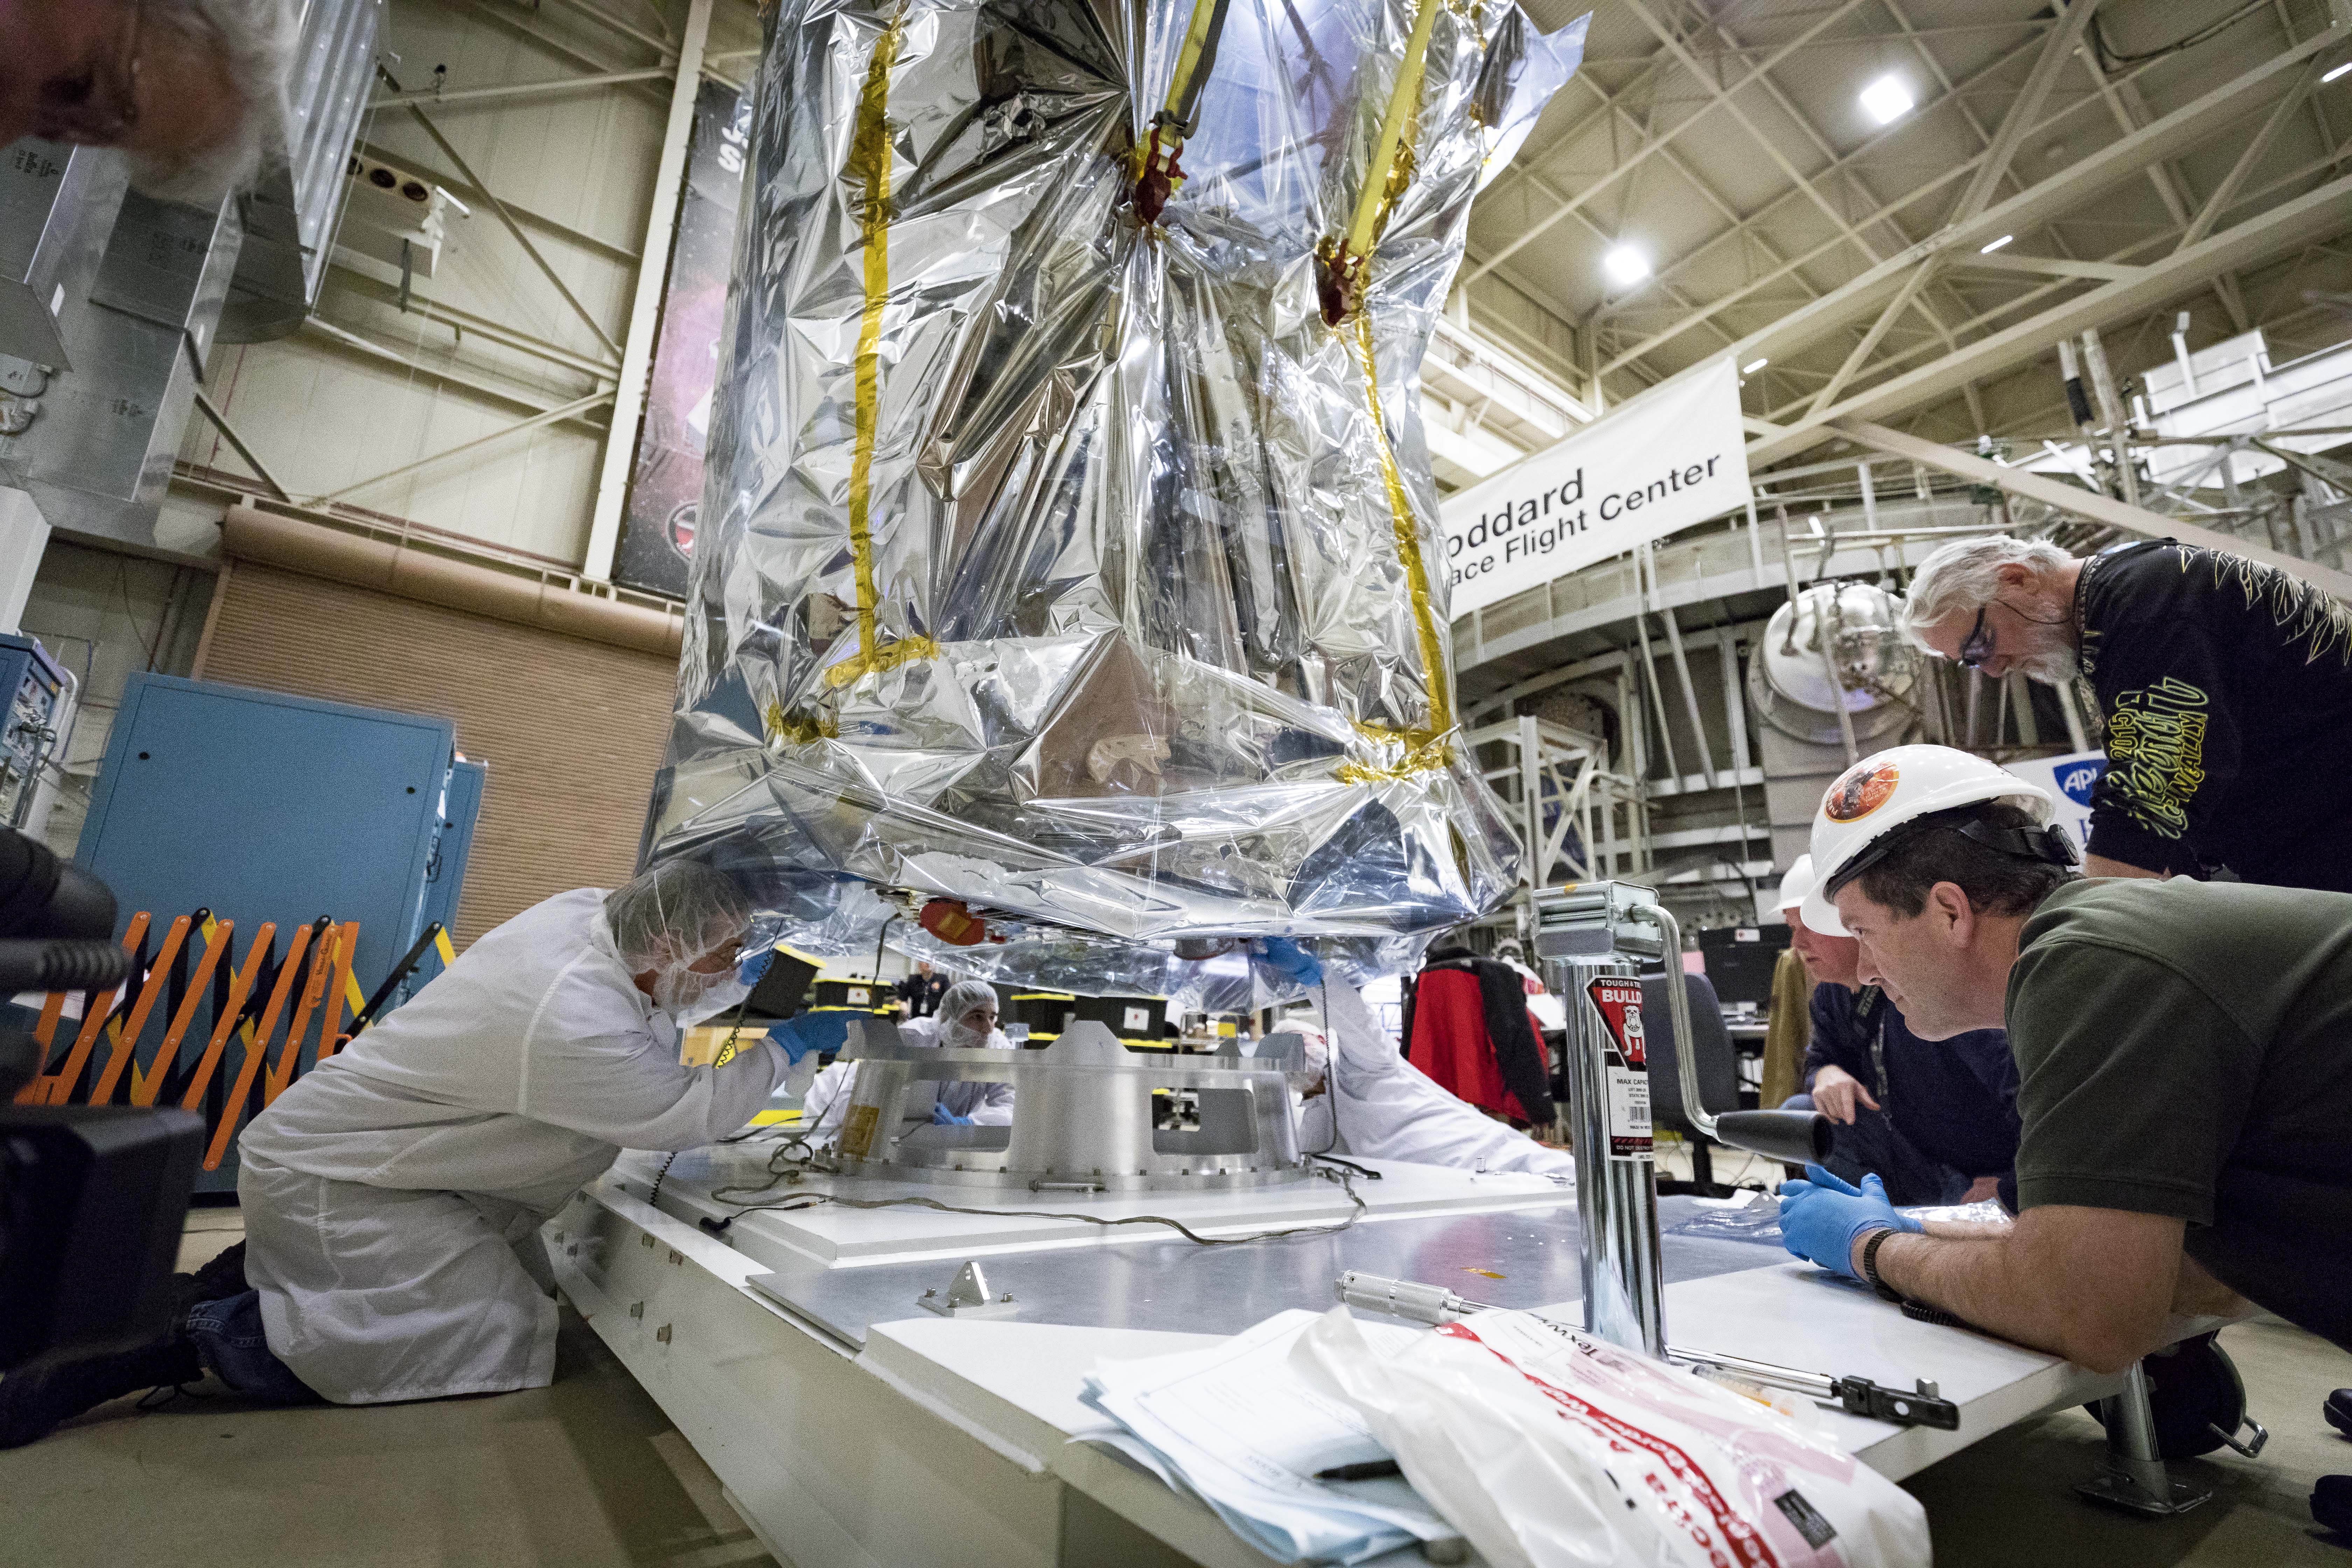 Parker Solar Probe team members connect the spacecraft to a specially built platform after removing the probe from the Space Environment Simulator at NASA’s Goddard Space Flight Center in Greenbelt, Maryland, on March 24, 2018. The probe will undergo about seven more days of testing outside the chamber, then travel to Florida for a scheduled launch on July 31, 2018, from NASA’s Kennedy Space Center in Cape Canaveral.